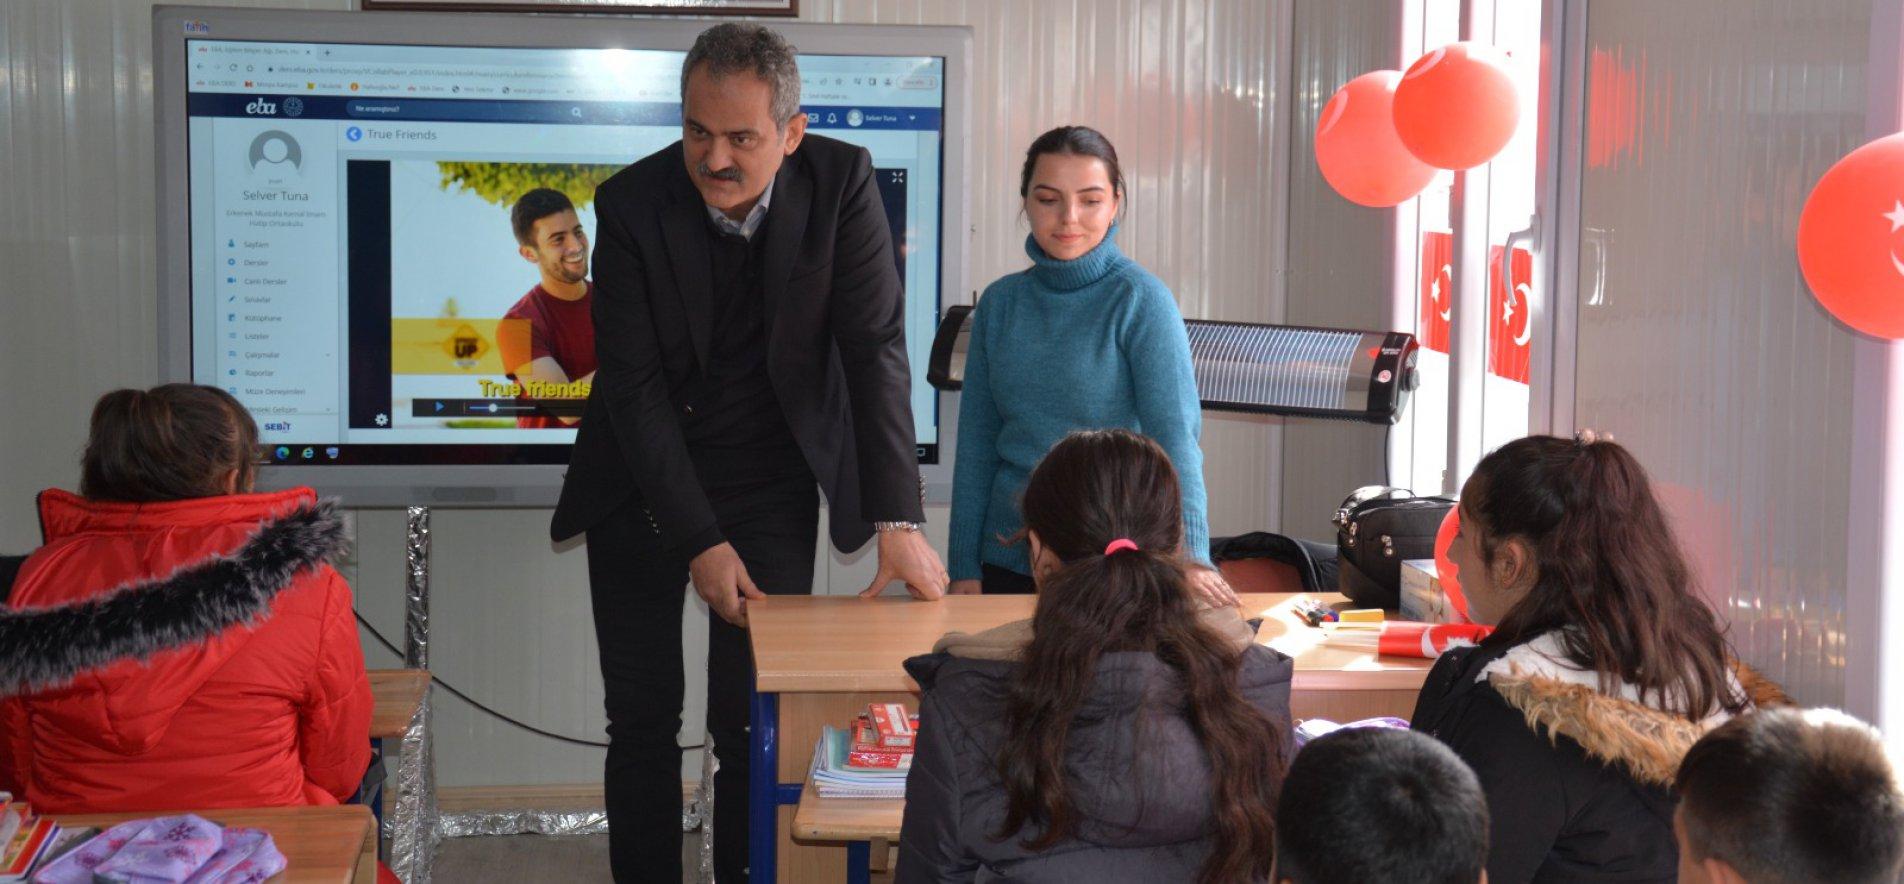 EDUCATION CONTINUES AT 1 THOUSAND 476 POINTS IN THE EARTHQUAKE ZONE